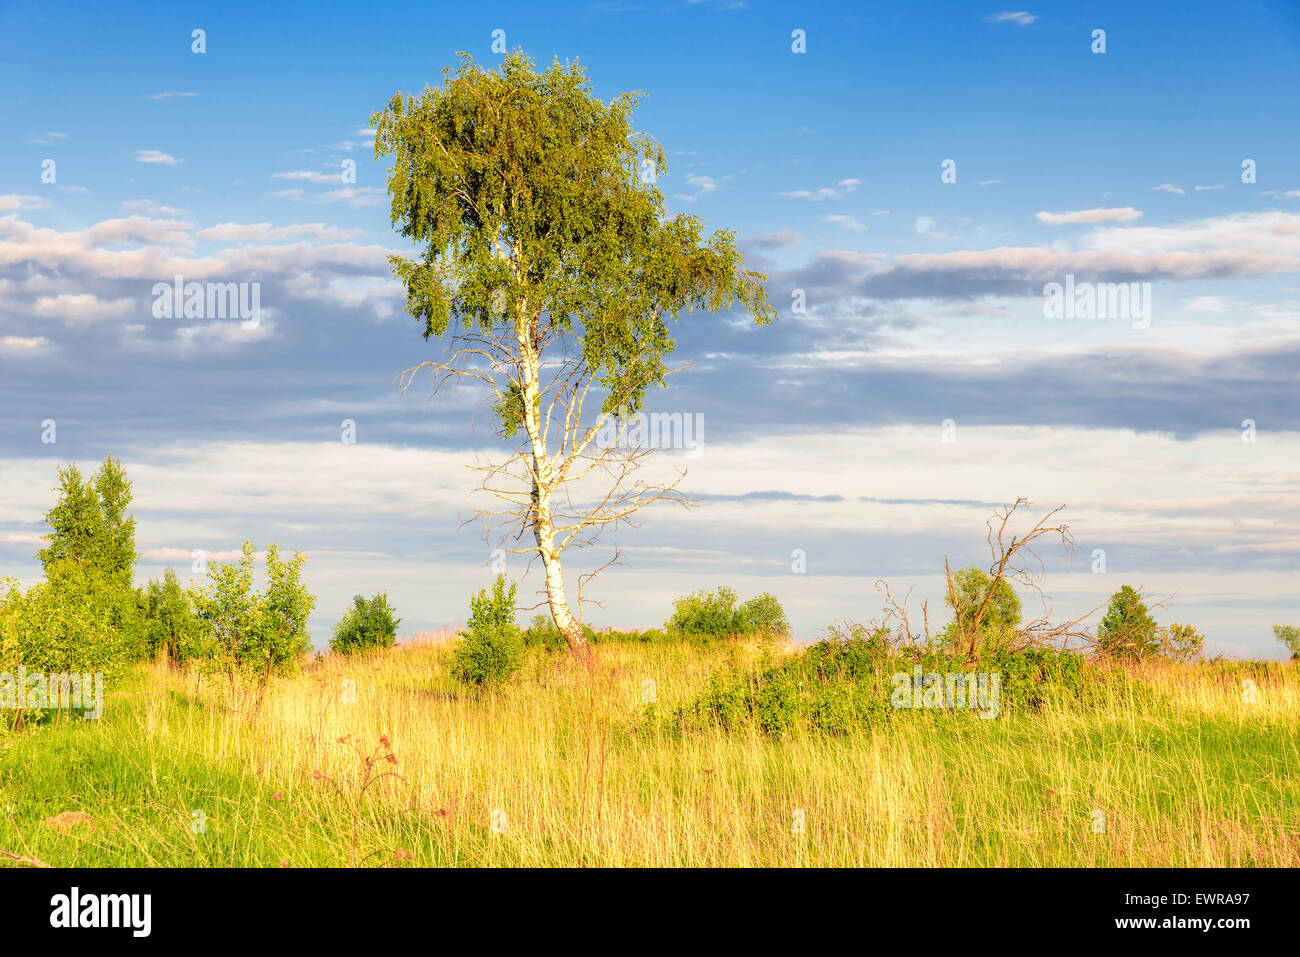 Yellow and green field with lone silver birch tree and white cloud Stock Photo